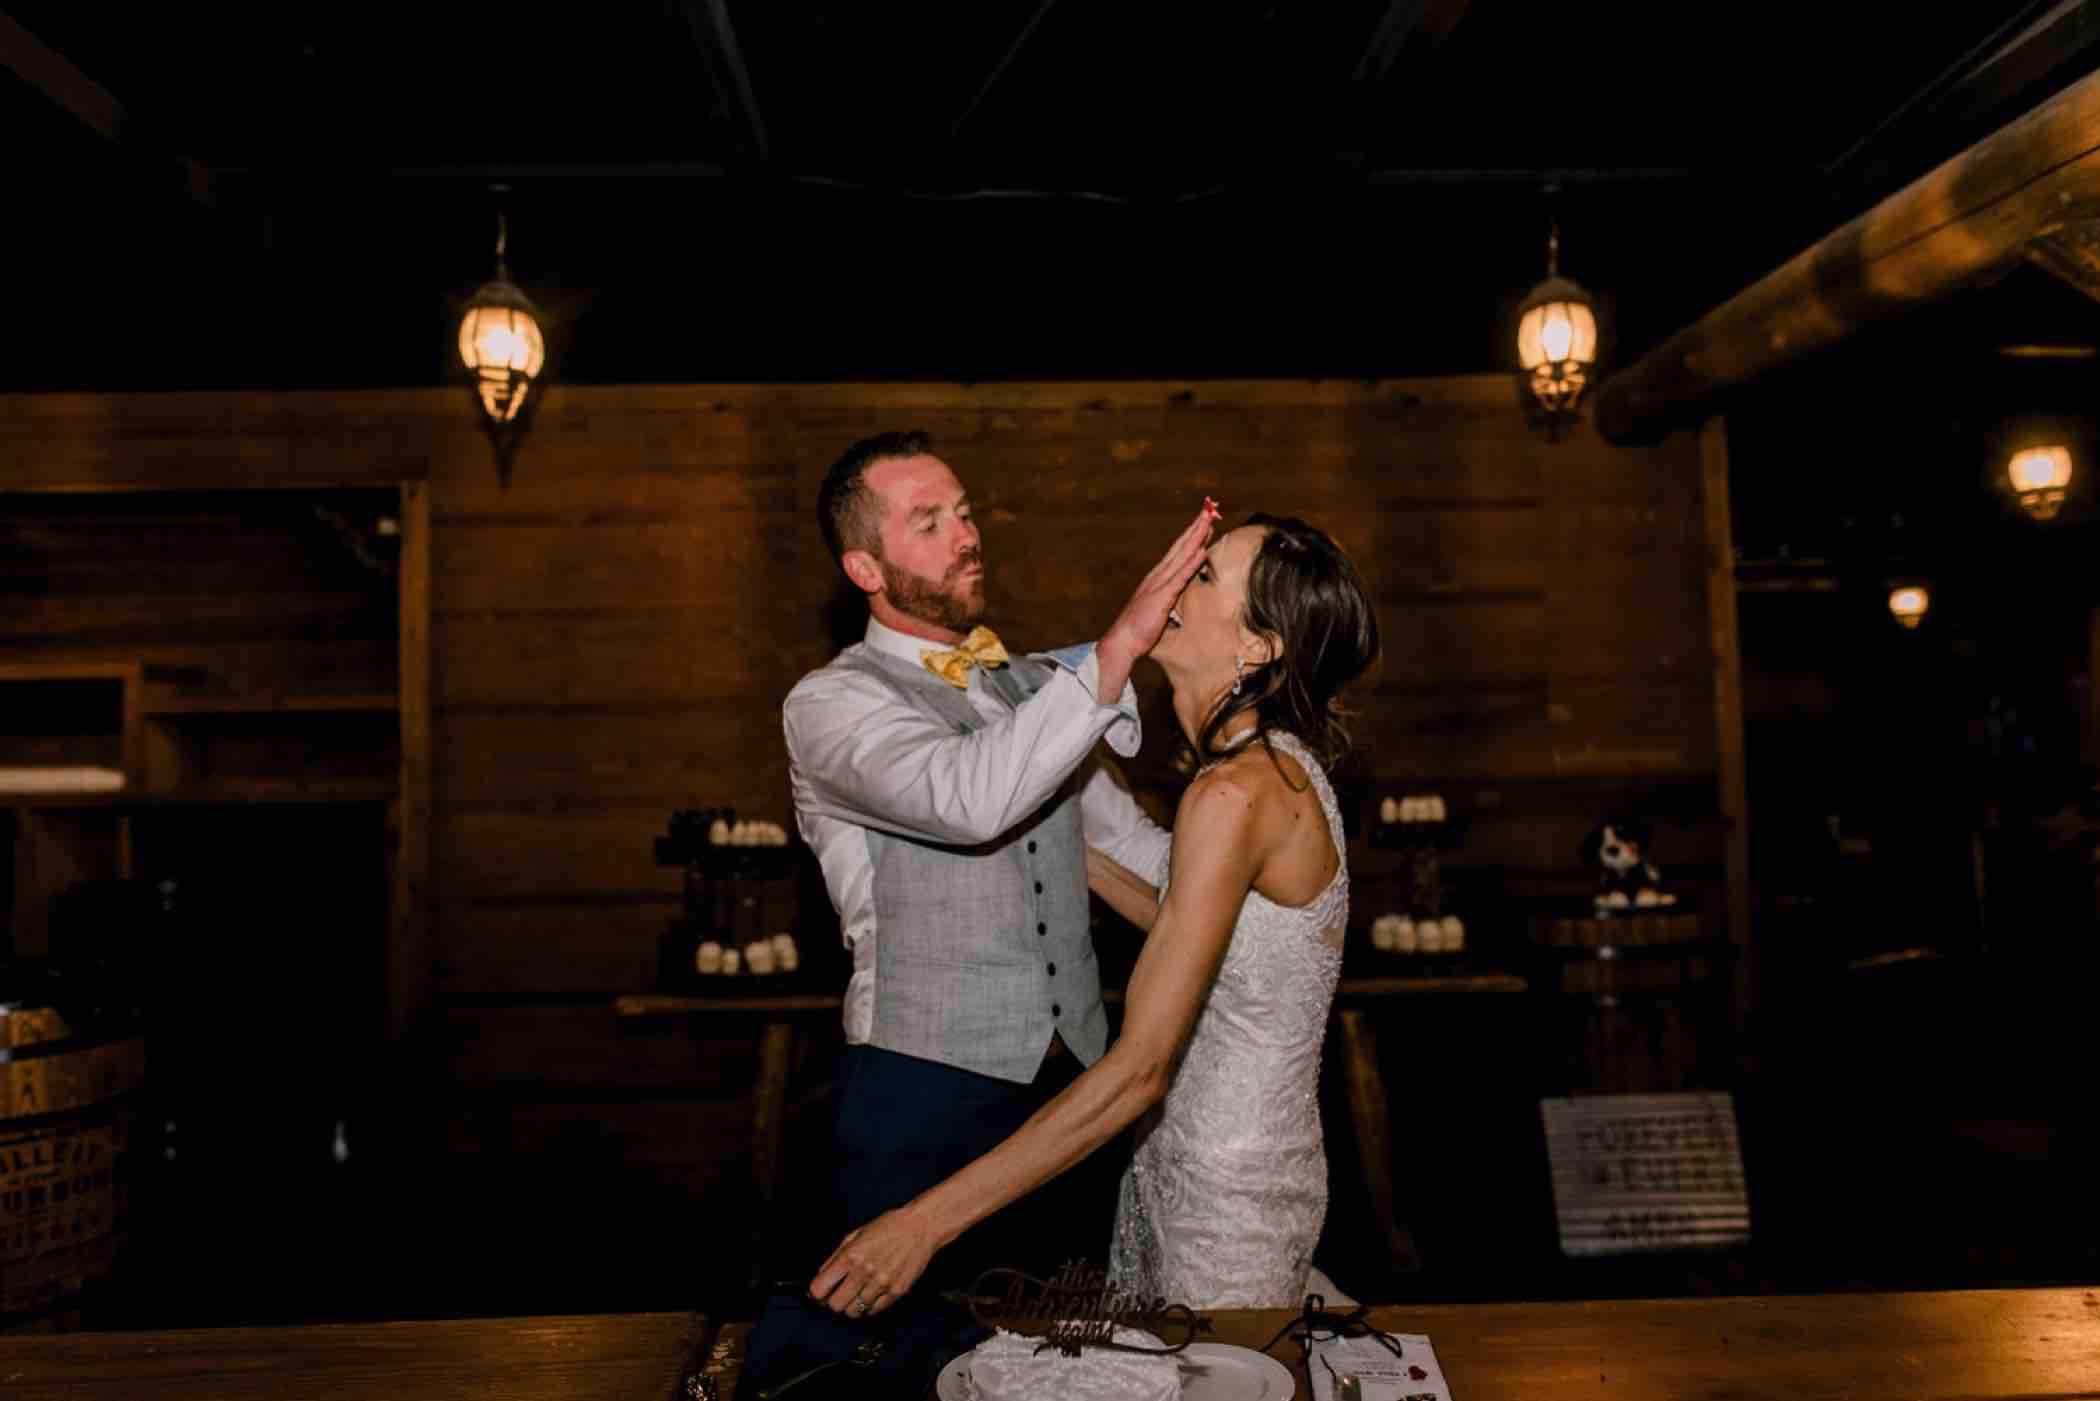 The groom smashes the cake onto his bride's face during their wedding reception at Piney River Ranch in Vail, Colorado. Photo by Ali and Garrett, Romantic, Adventurous, Nostalgic Wedding Photographers.